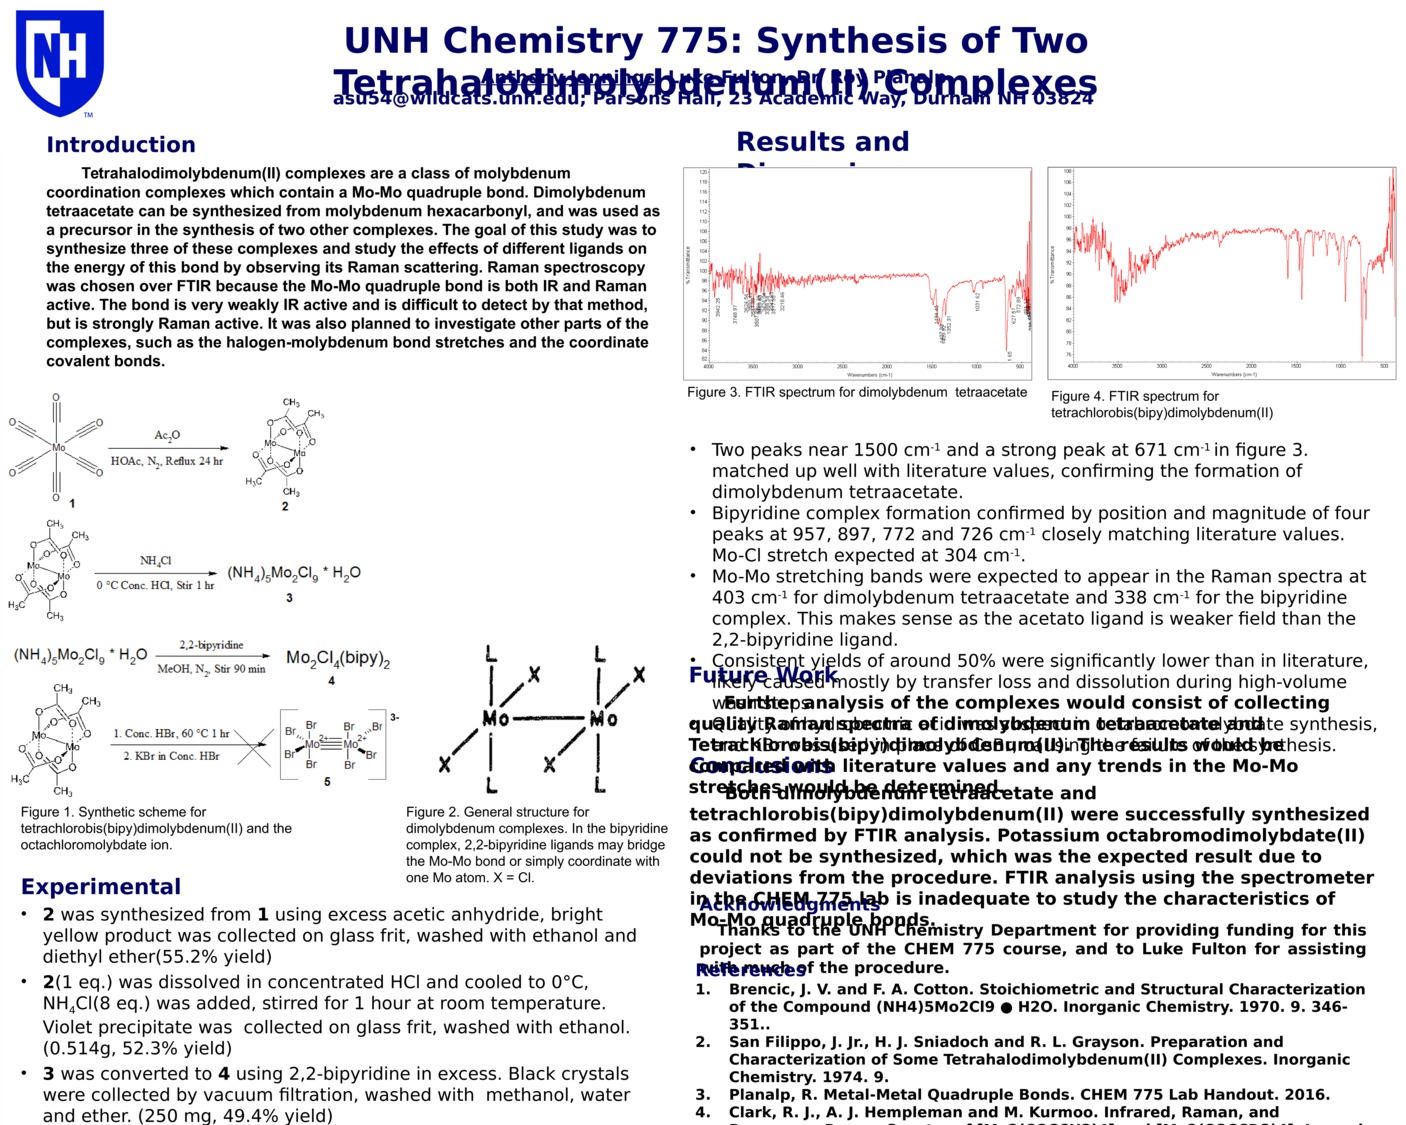 Unh Chemistry 775: Synthesis Of Two Tetrahalodimolybdenum(Ii) Complexes by asu54